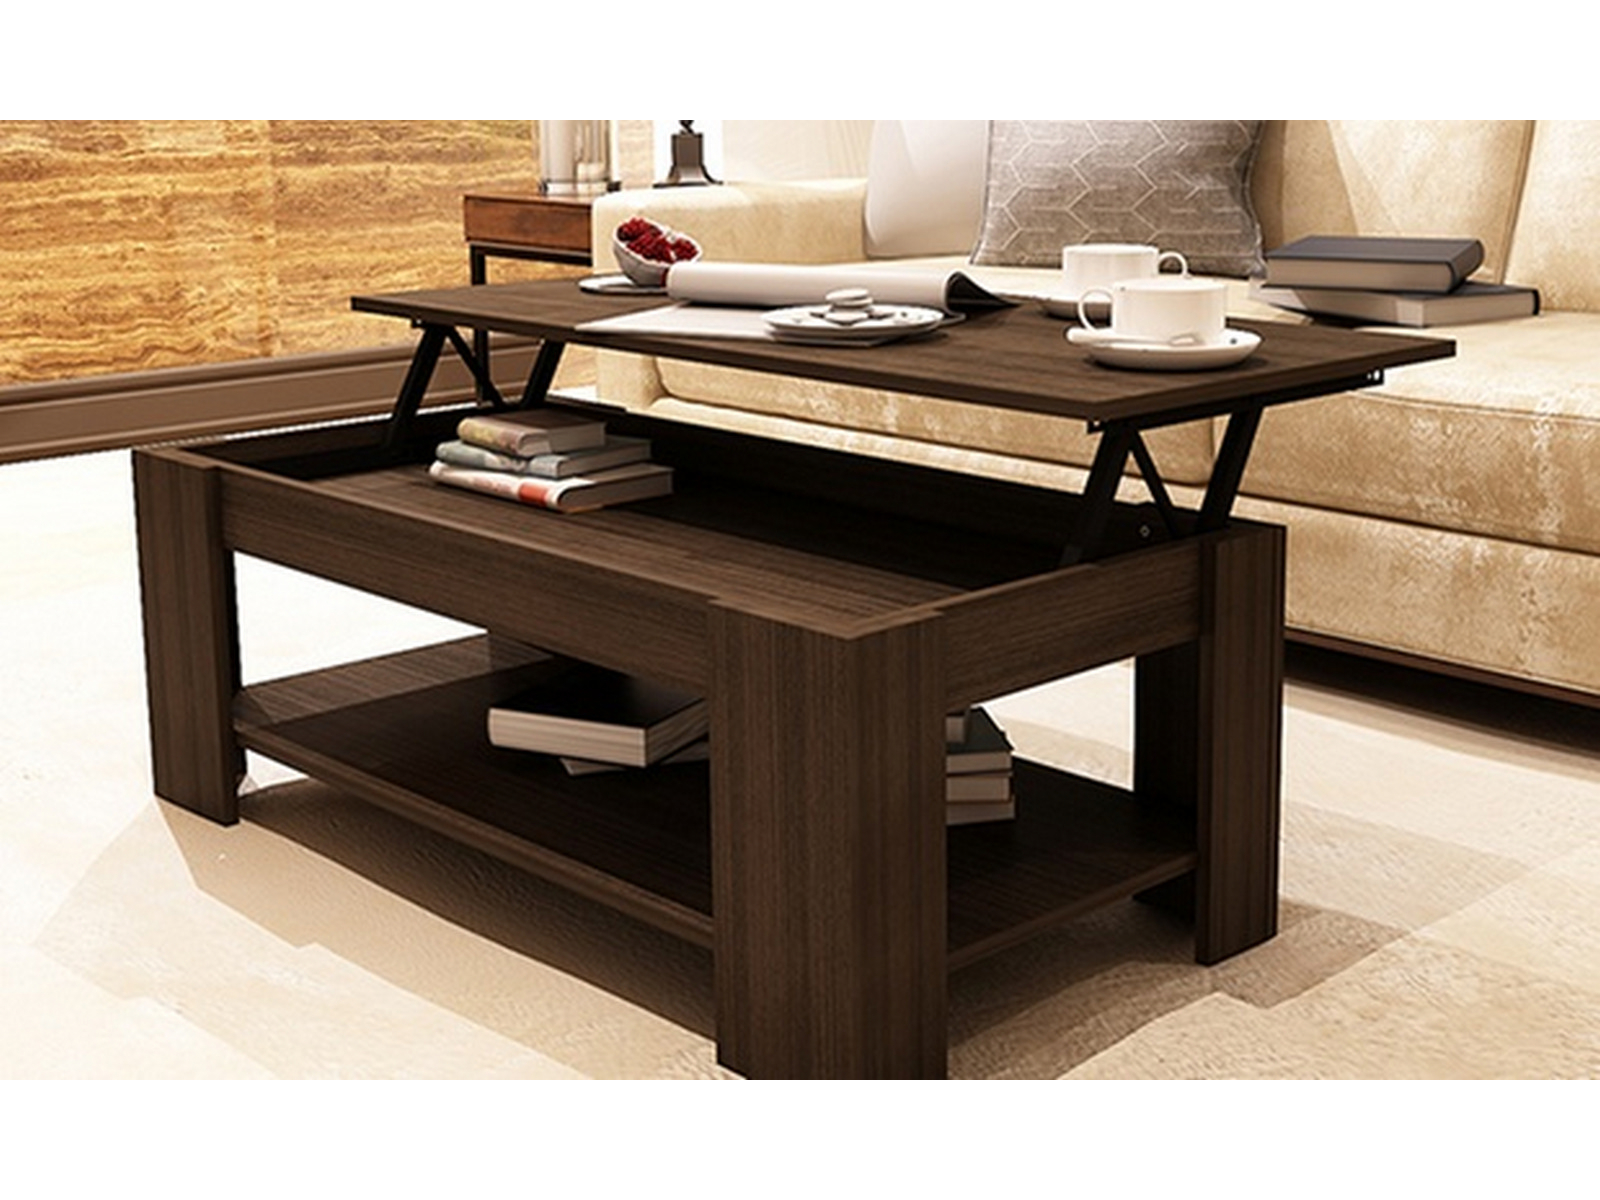 New Caspian Espresso Lift Up Top Coffee Table With Storage Shelf throughout sizing 1600 X 1200